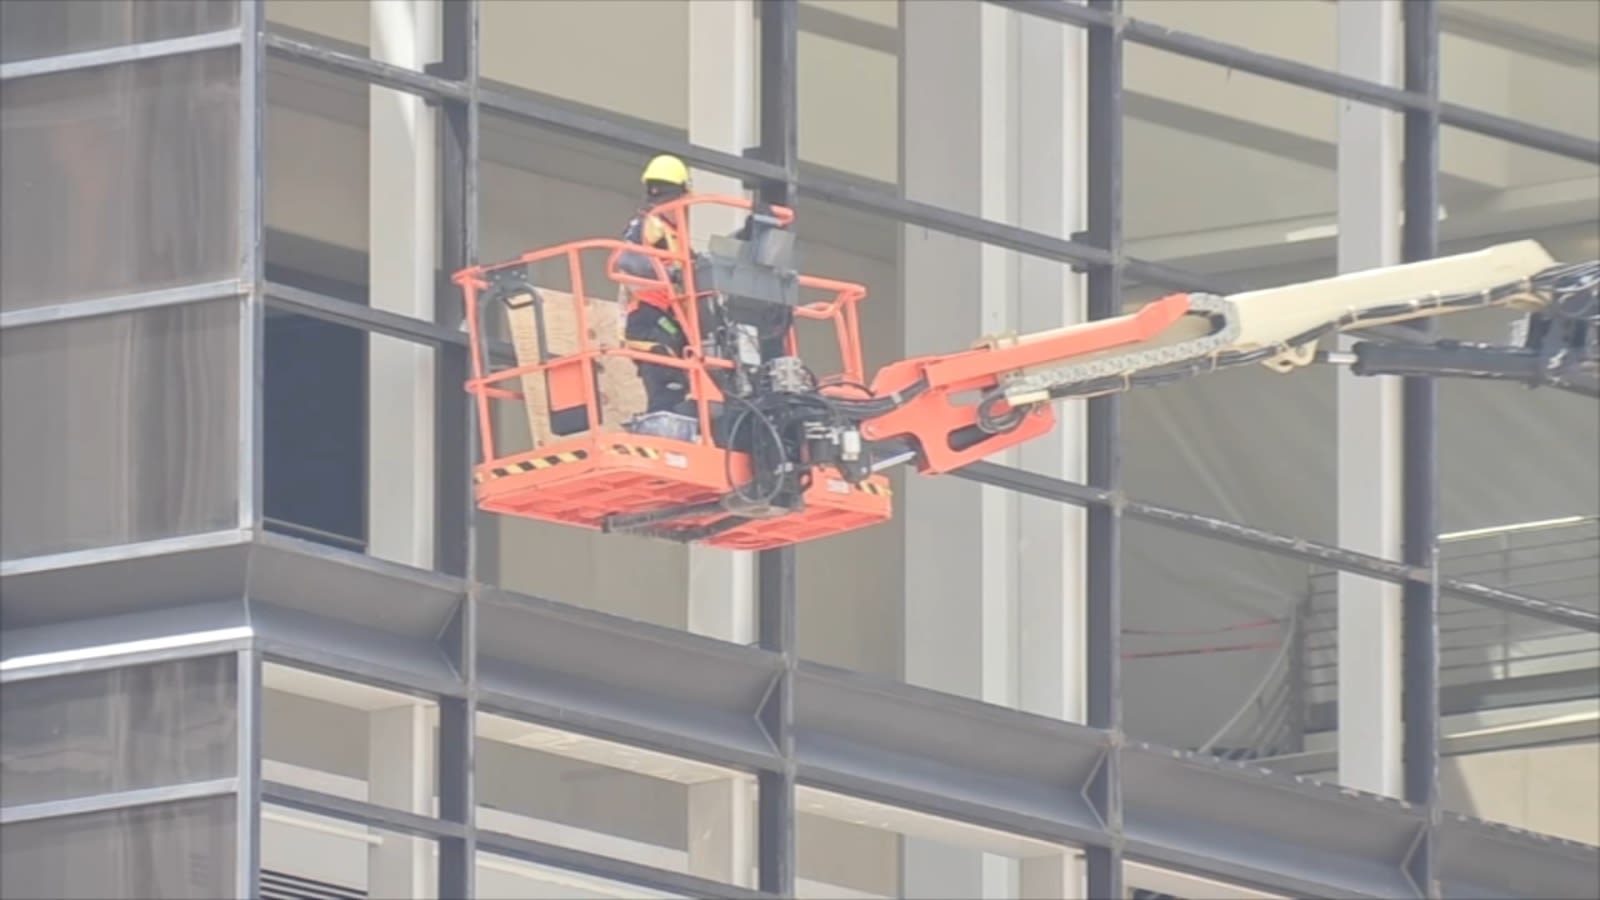 About 4,000 high-rise building windows shattered in downtown Houston from recent storms